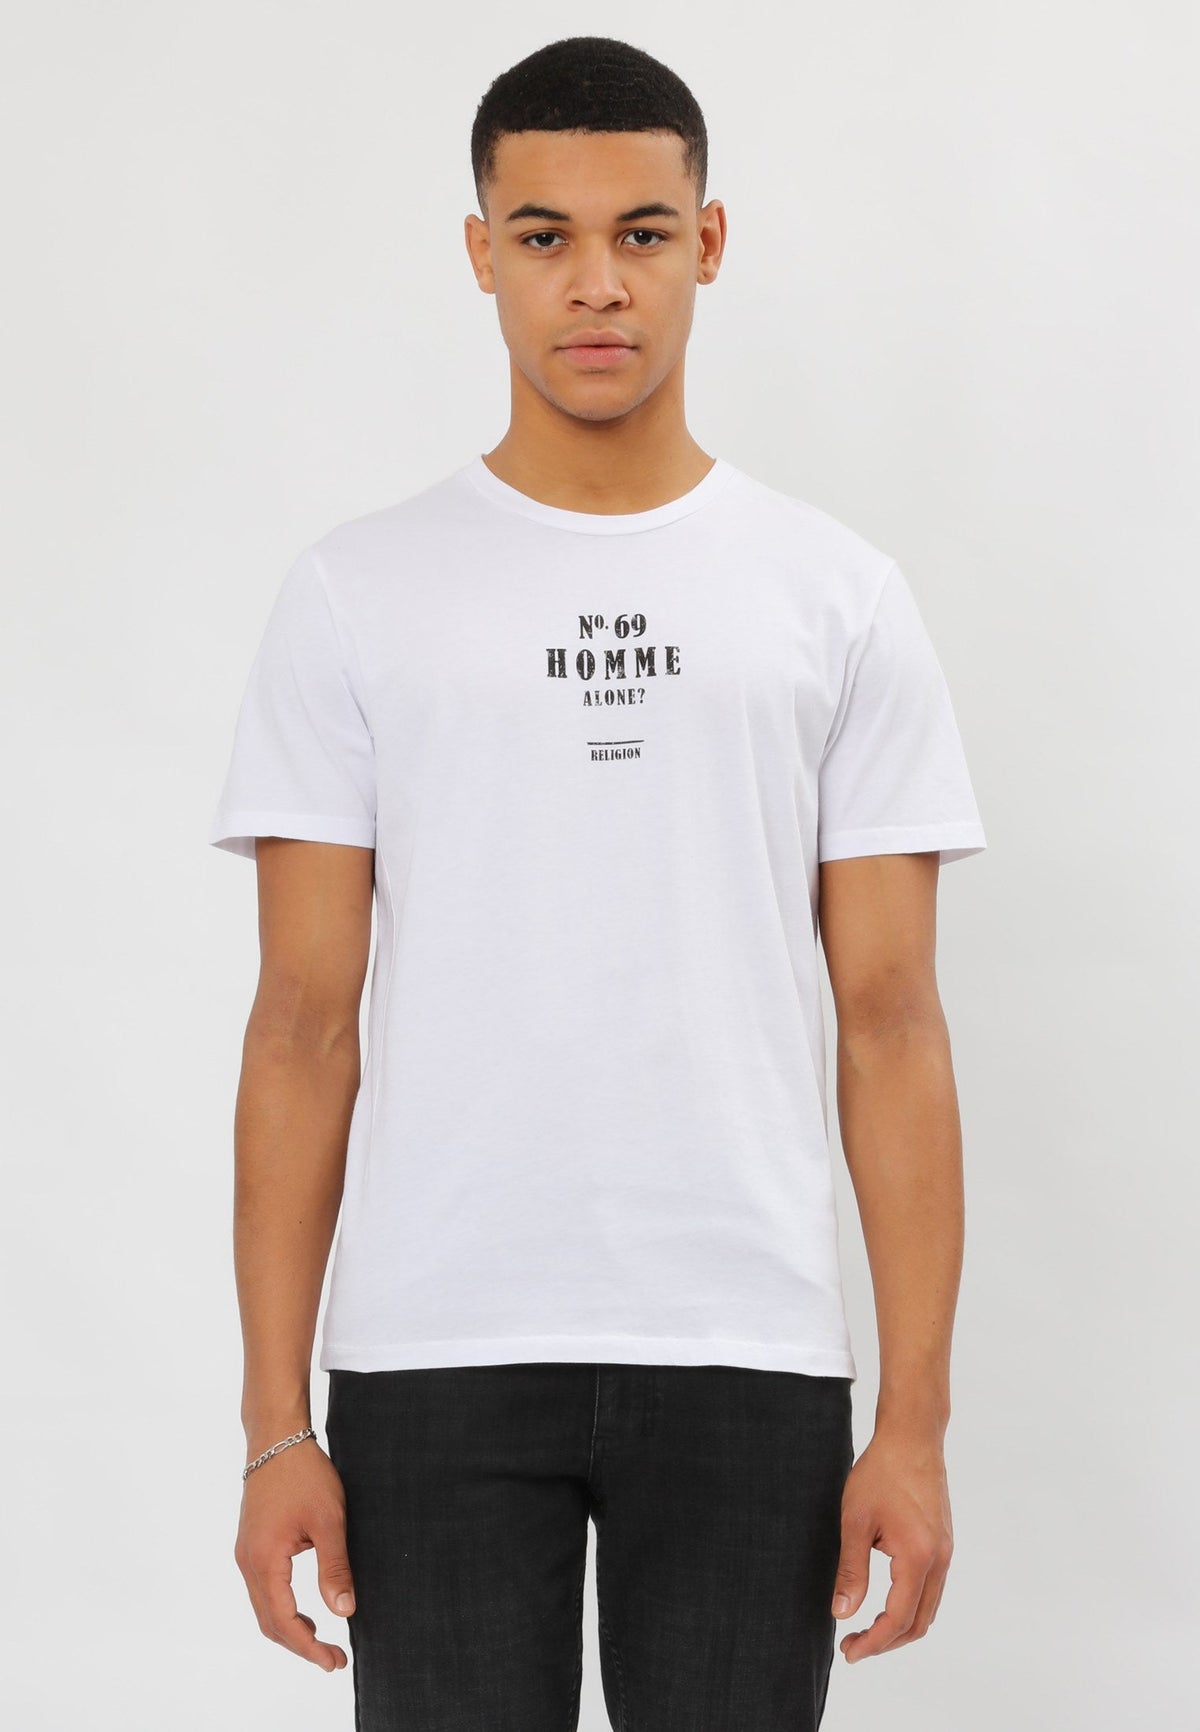 HOMME ALONE T-SHIRT WHITE